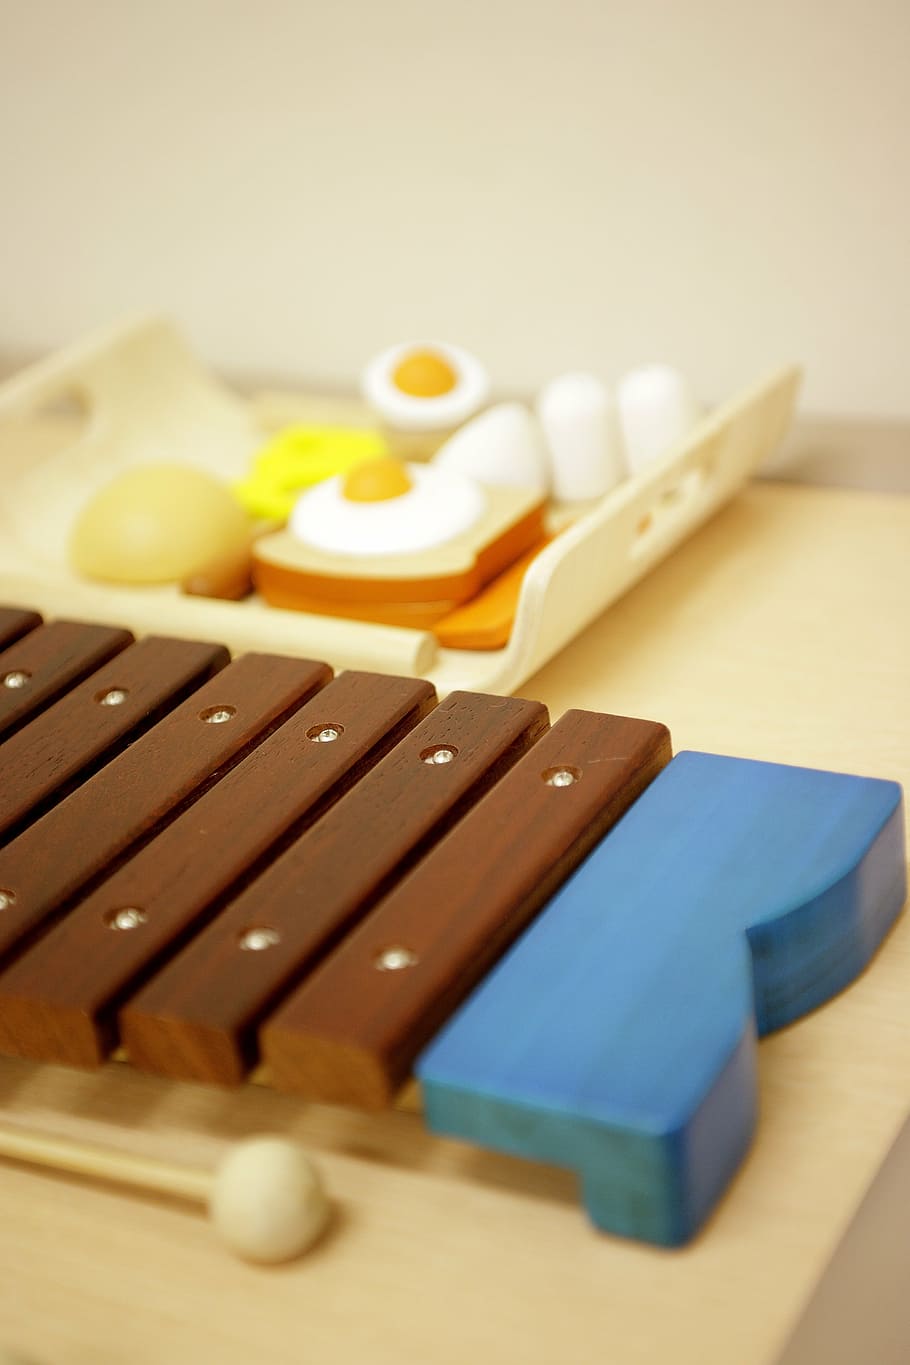 xylophone, toys, toy, children, food, food and drink, indoors, still life, table, selective focus